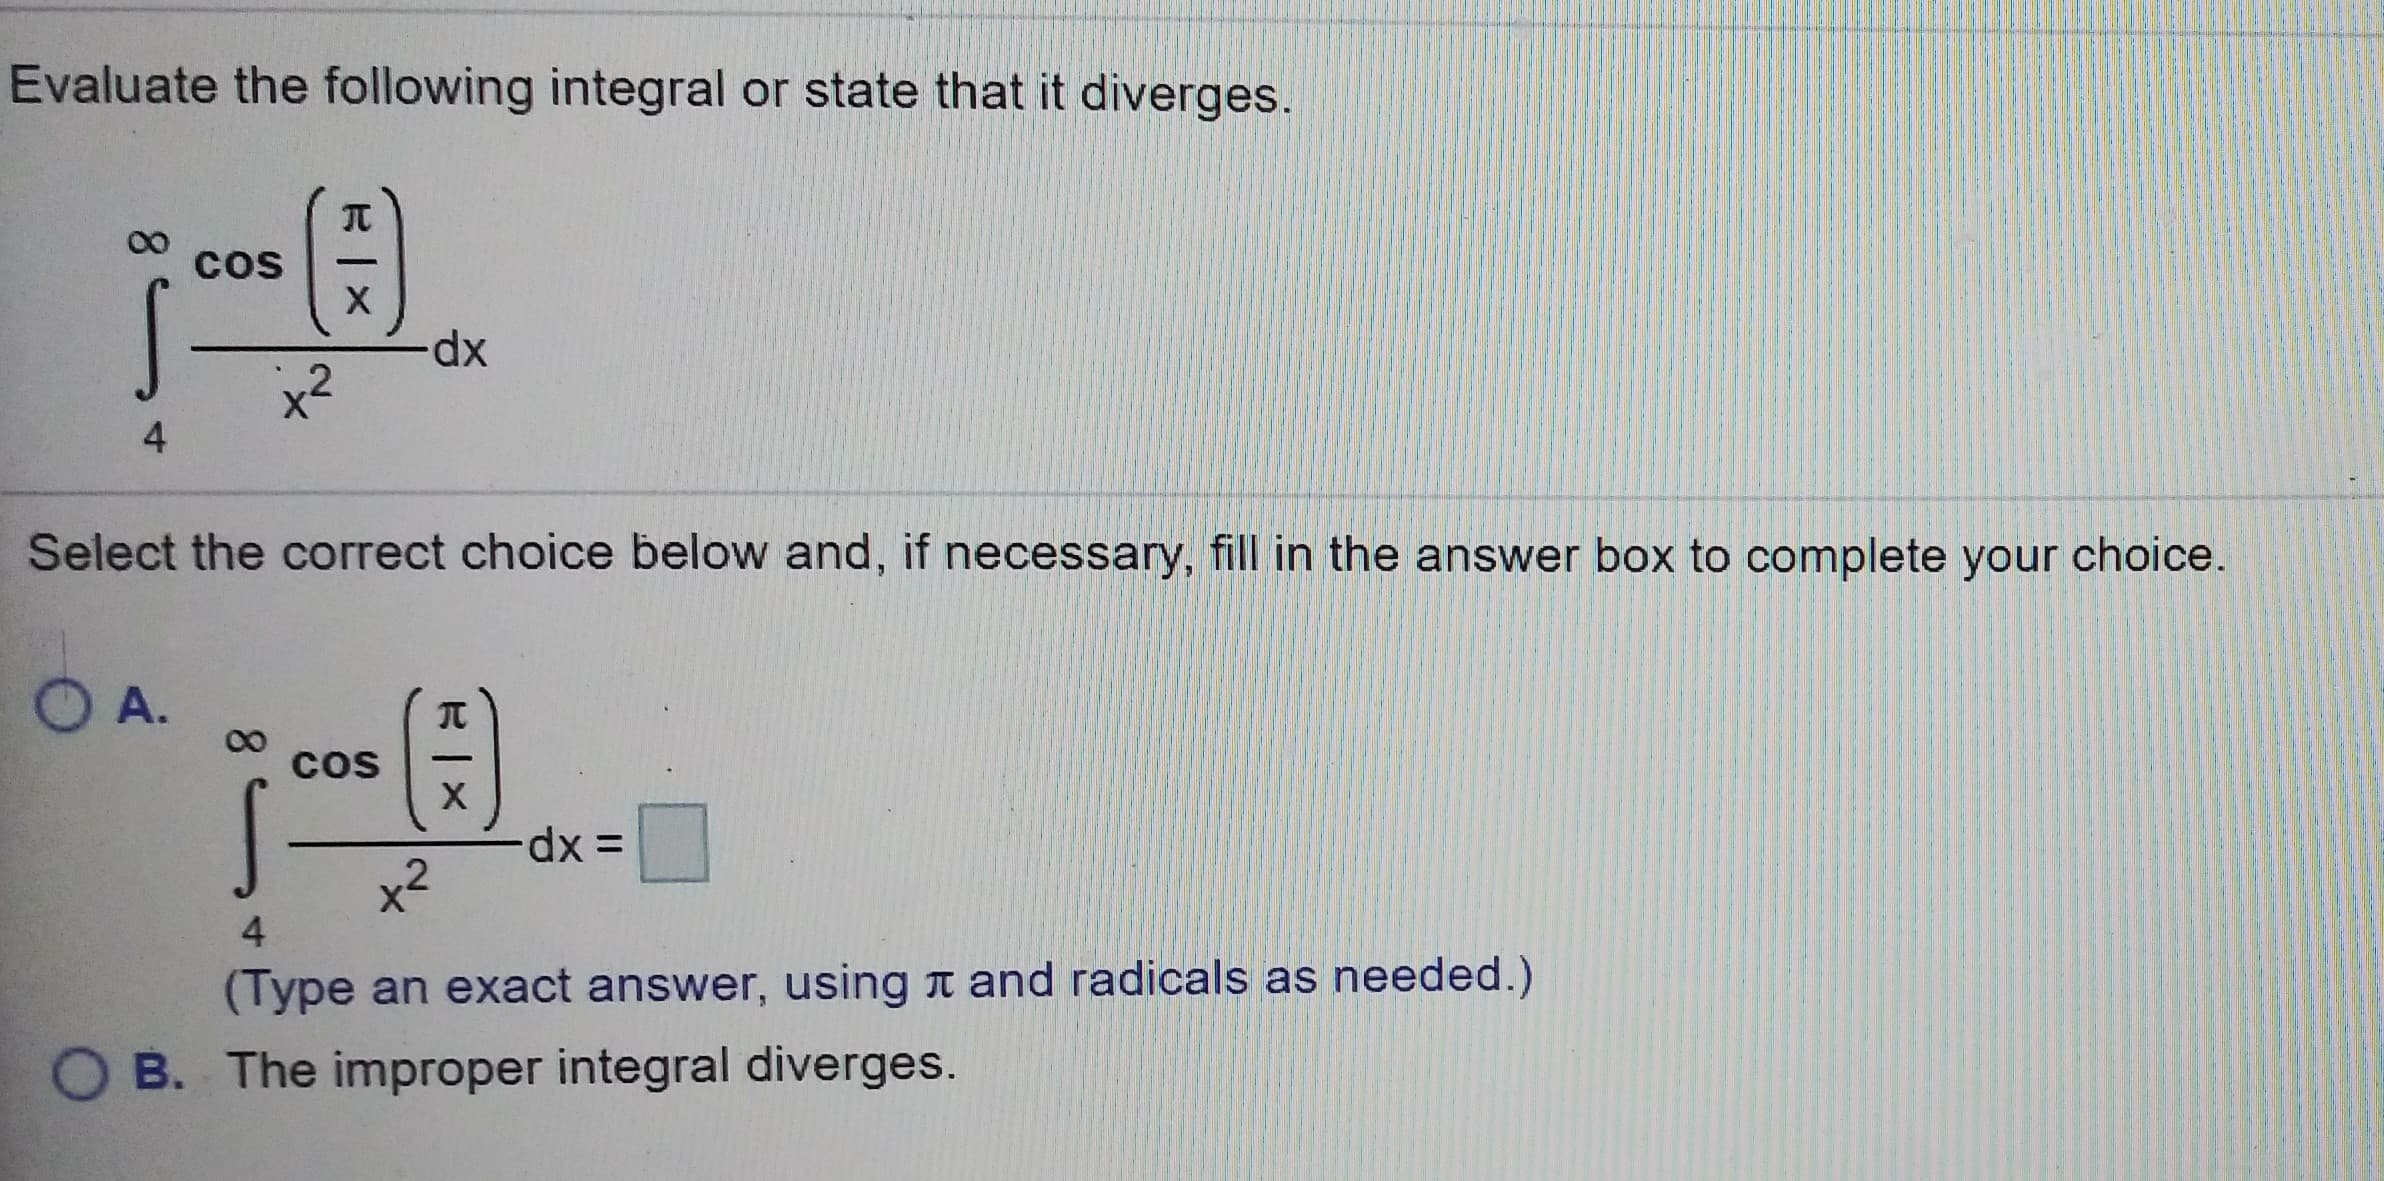 Evaluate the following integral or state that it diverges
00 cos
dx
2
4
Select the correct choice below and, if necessary, fill in the answer box to complete your choice.
兀
cos
2
4
(Type an exact answer, using π and radicals as needed.)
O B. The improper integral diverges.
